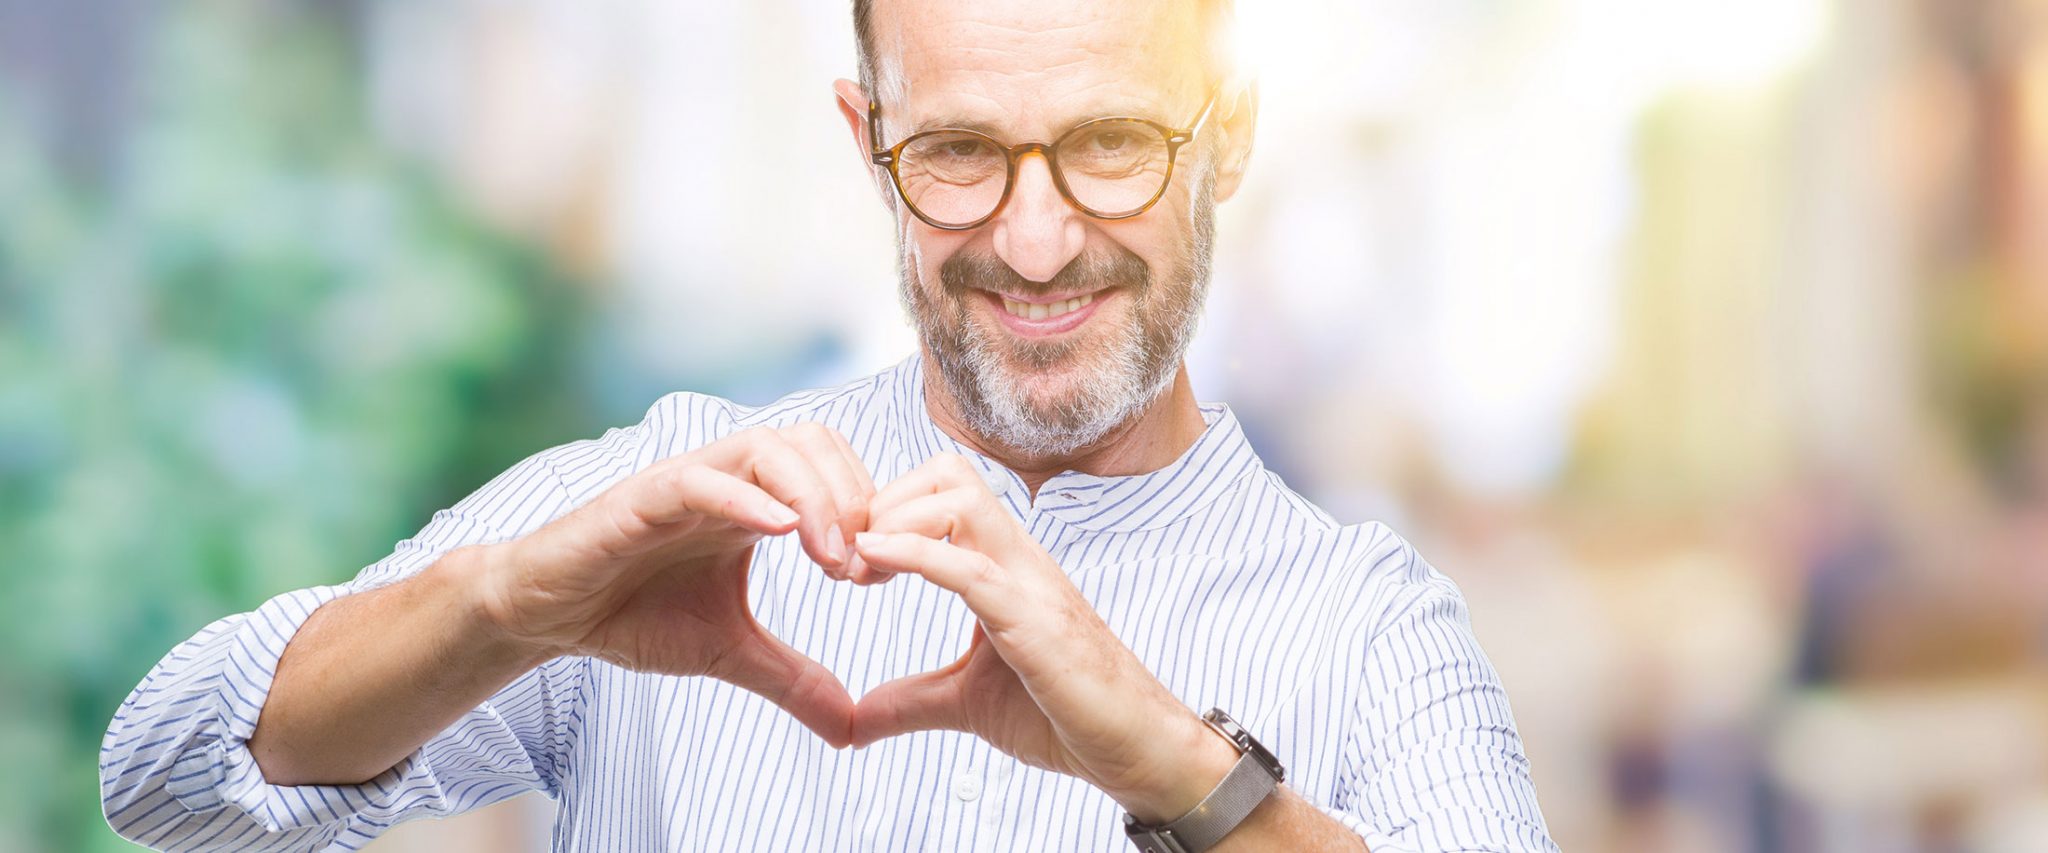 man shapes a heart with his fingers